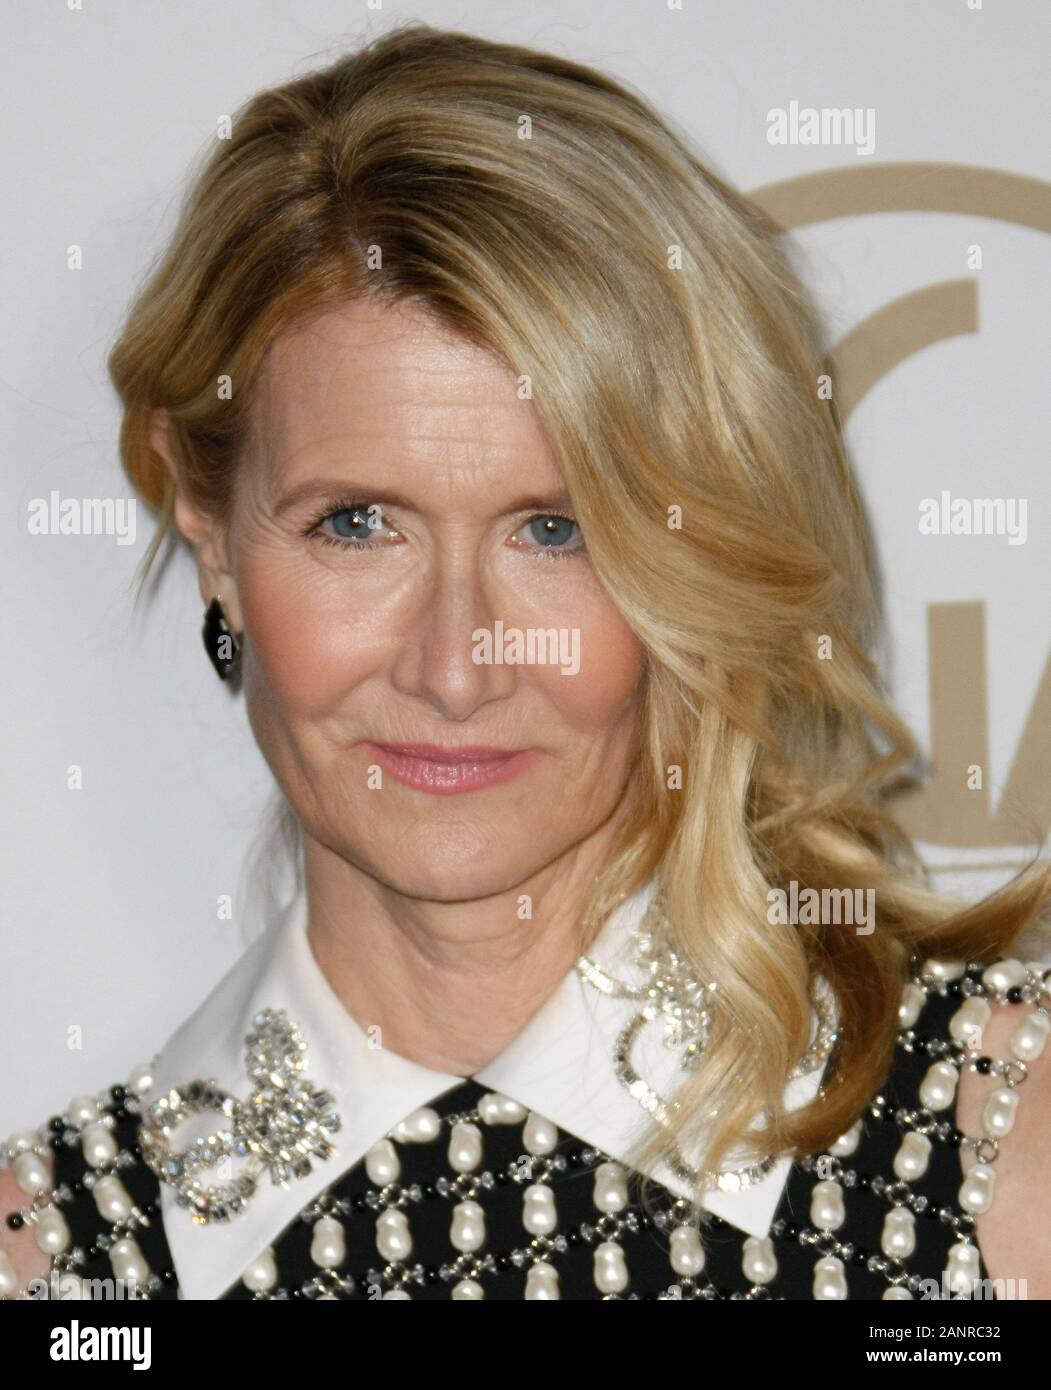 Hollywood, USA. 18th Jan, 2020. LOS ANGELES, CALIFORNIA - JANUARY 18: Laura Dern attends the 31st Annual Producers Guild Awards at Hollywood Palladium on January 18, 2020 in Los Angeles, California. Photo: CraSH/imageSPACE Credit: Imagespace/Alamy Live News Stock Photo